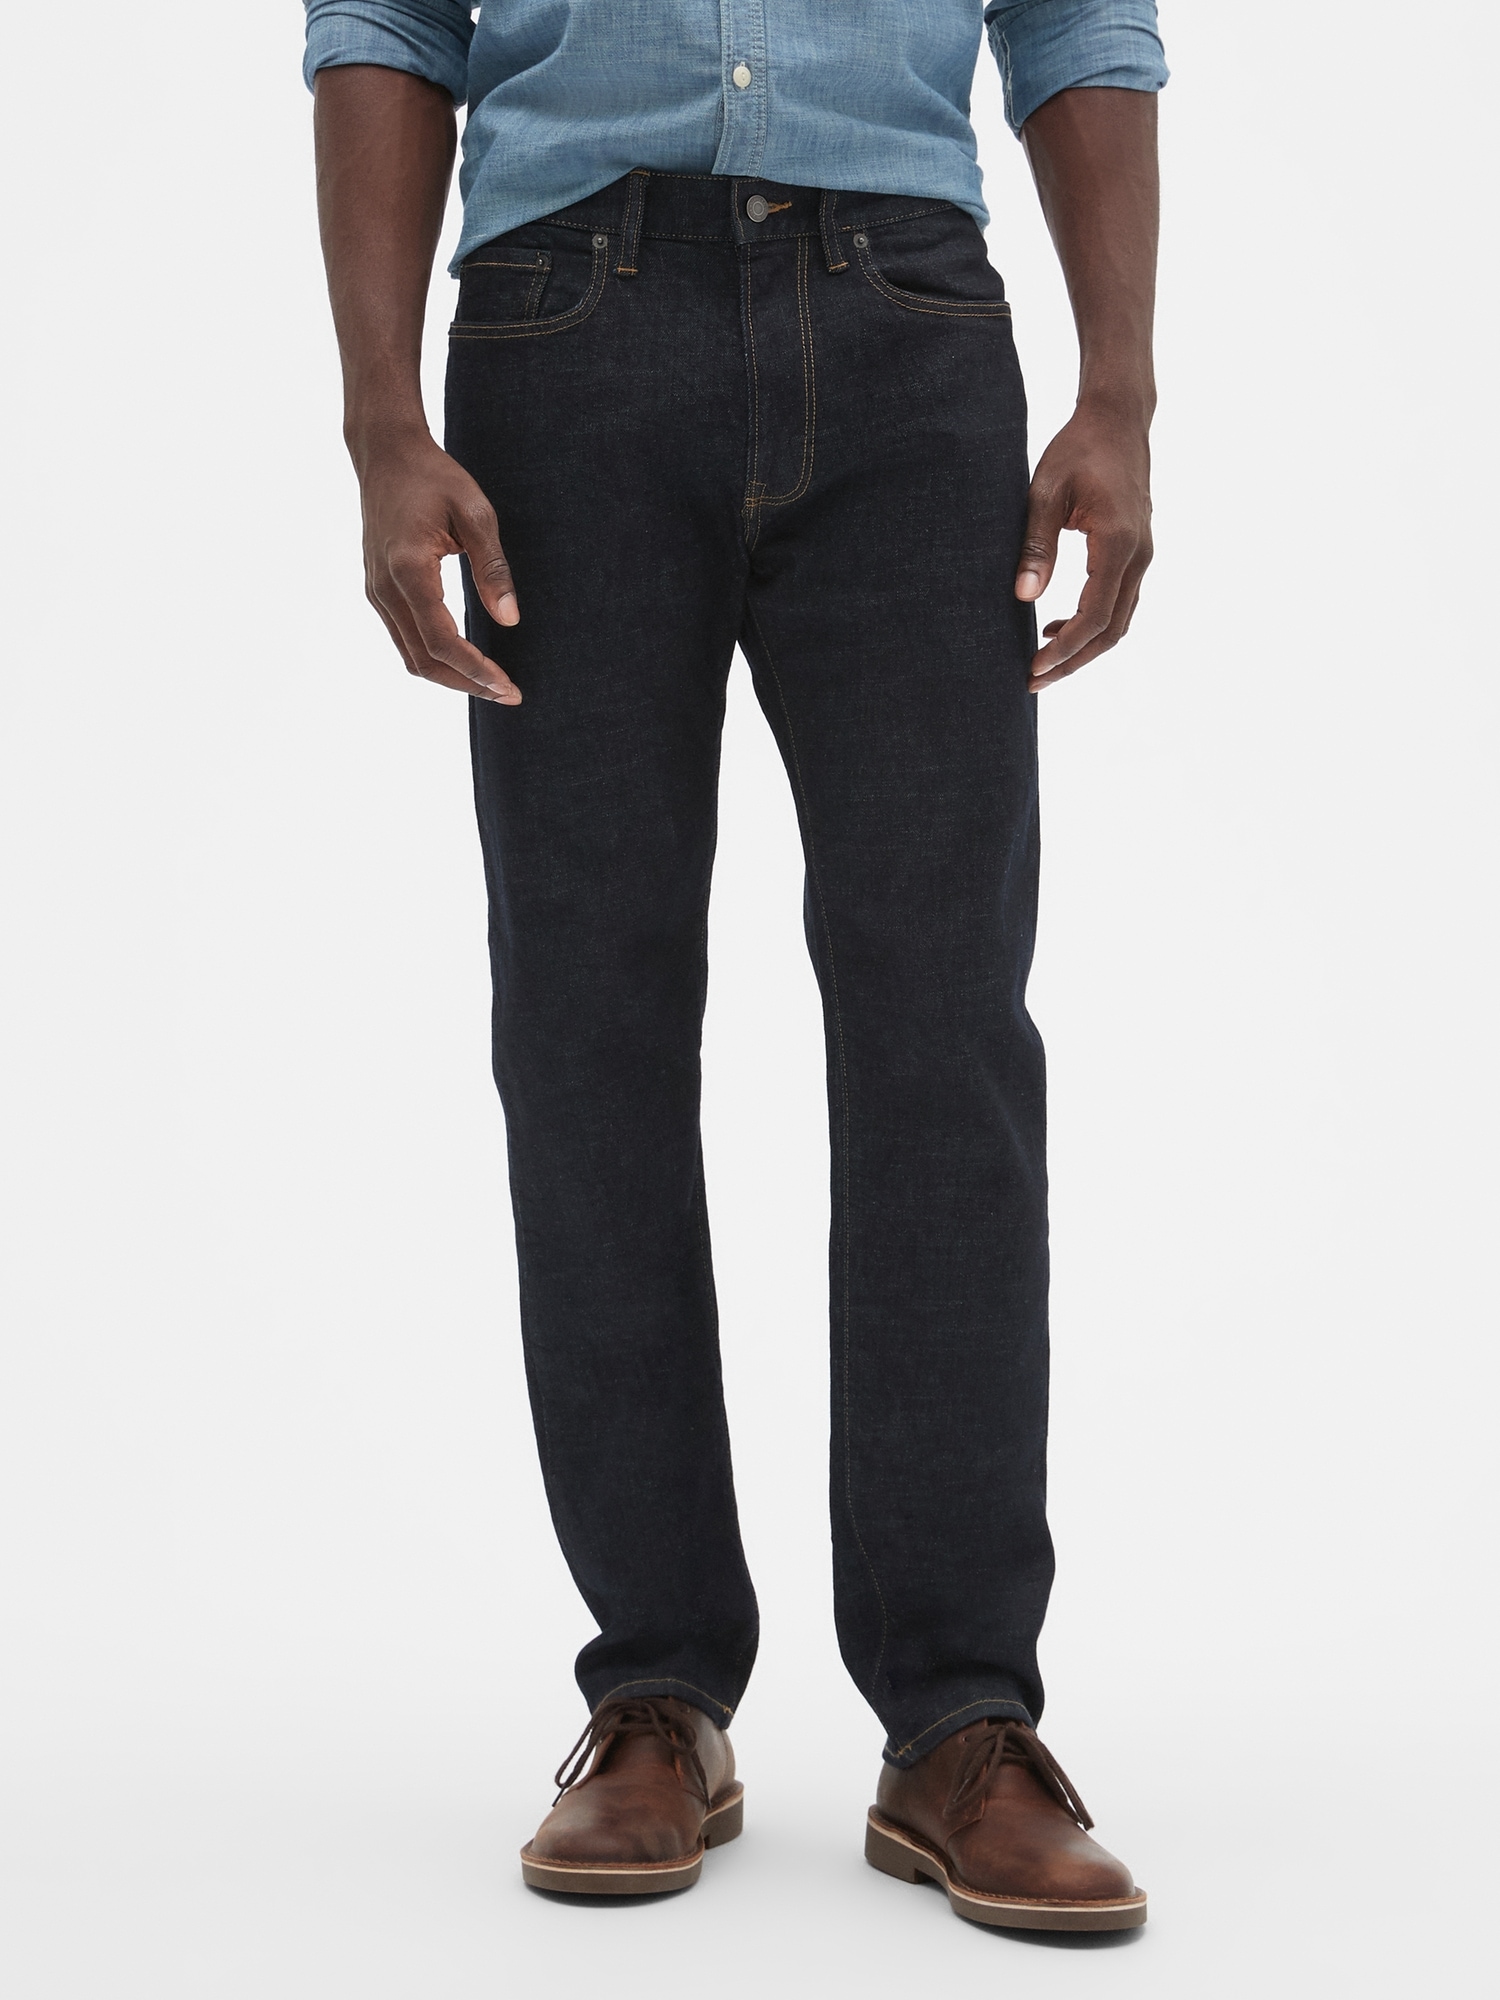 tapered athletic jeans